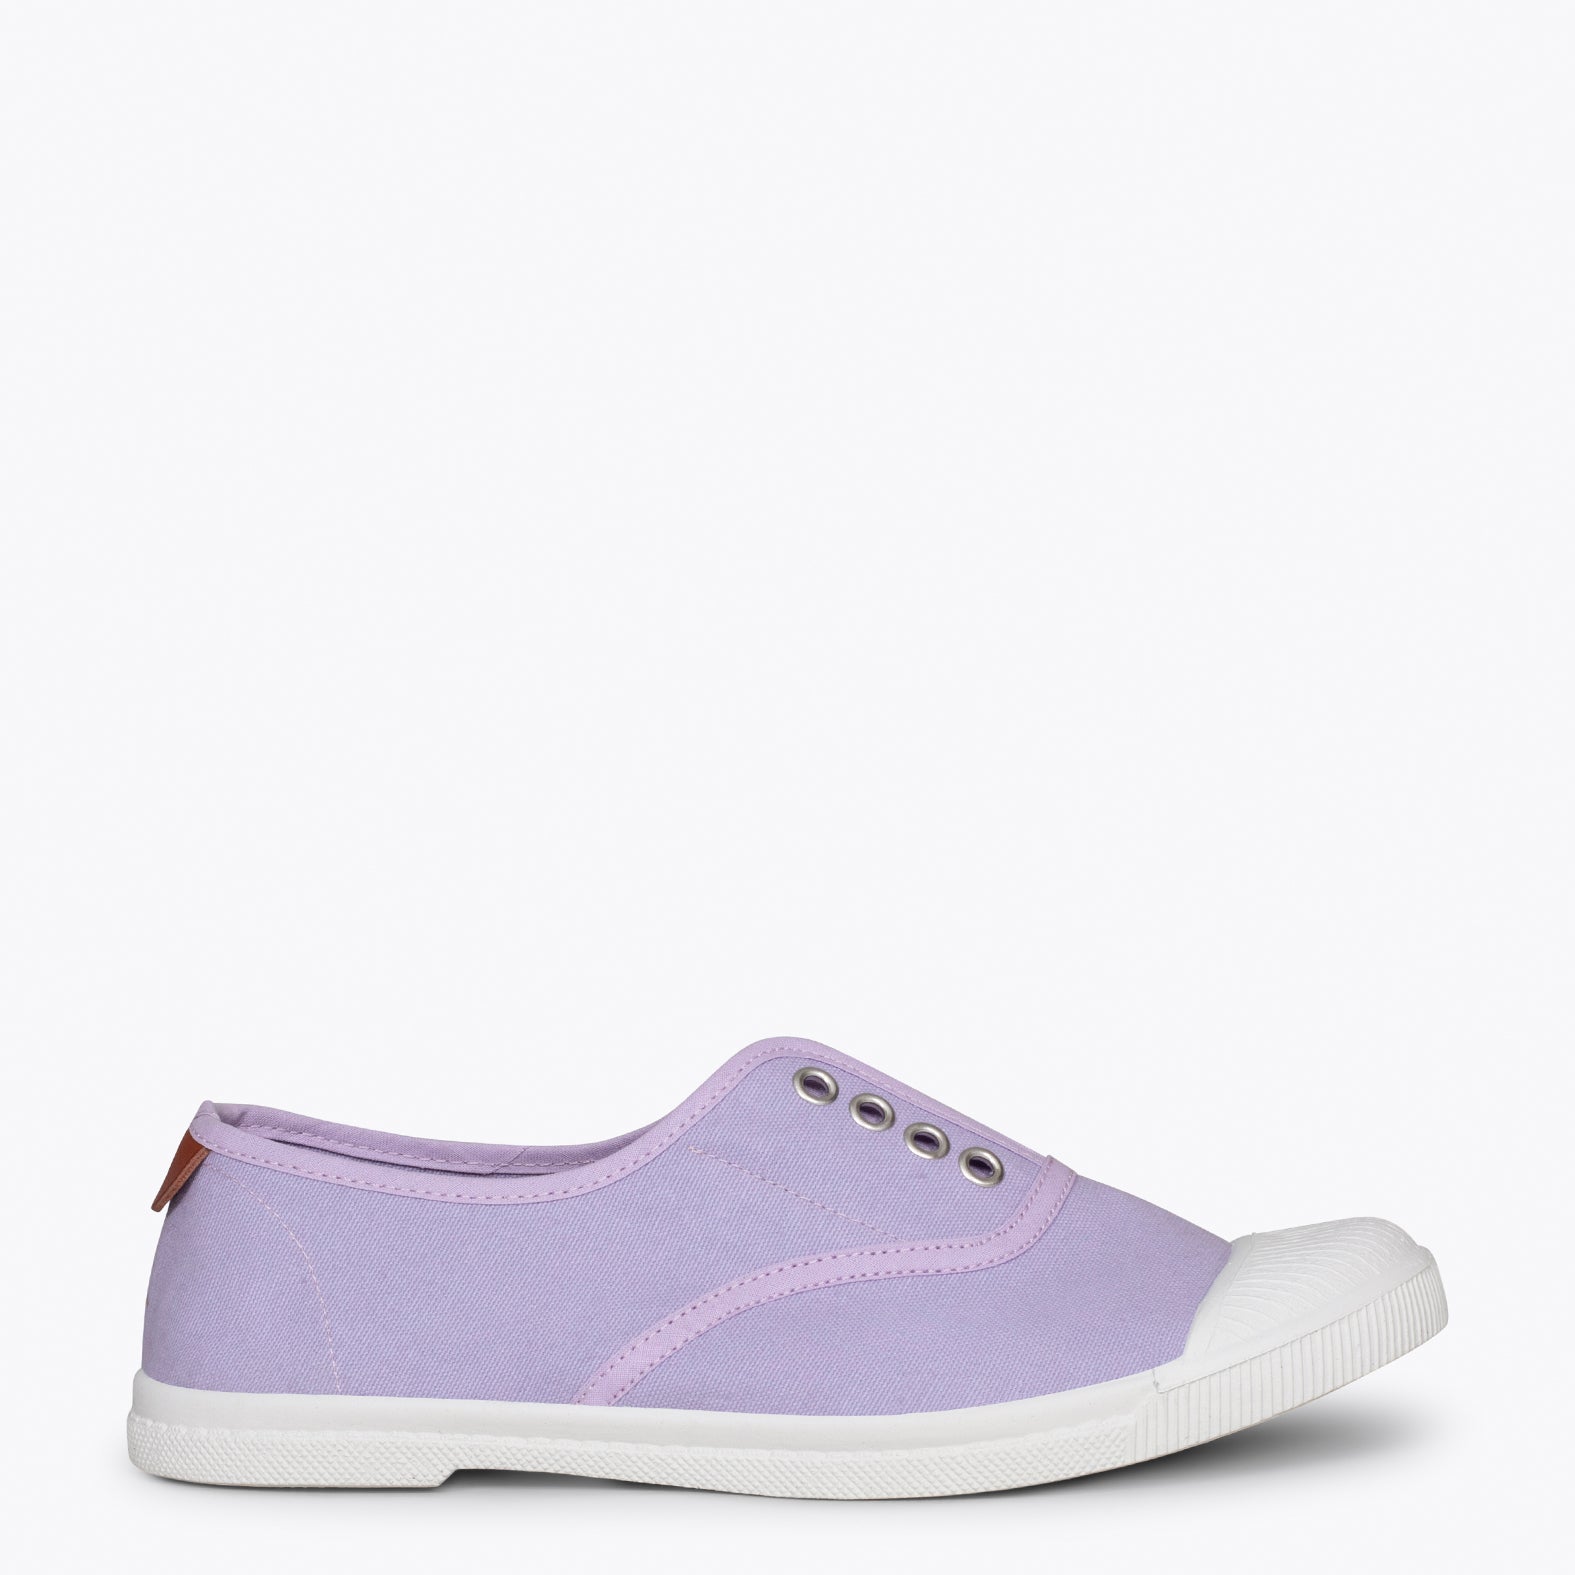 WAY – LAVENDER sneakers with elastic